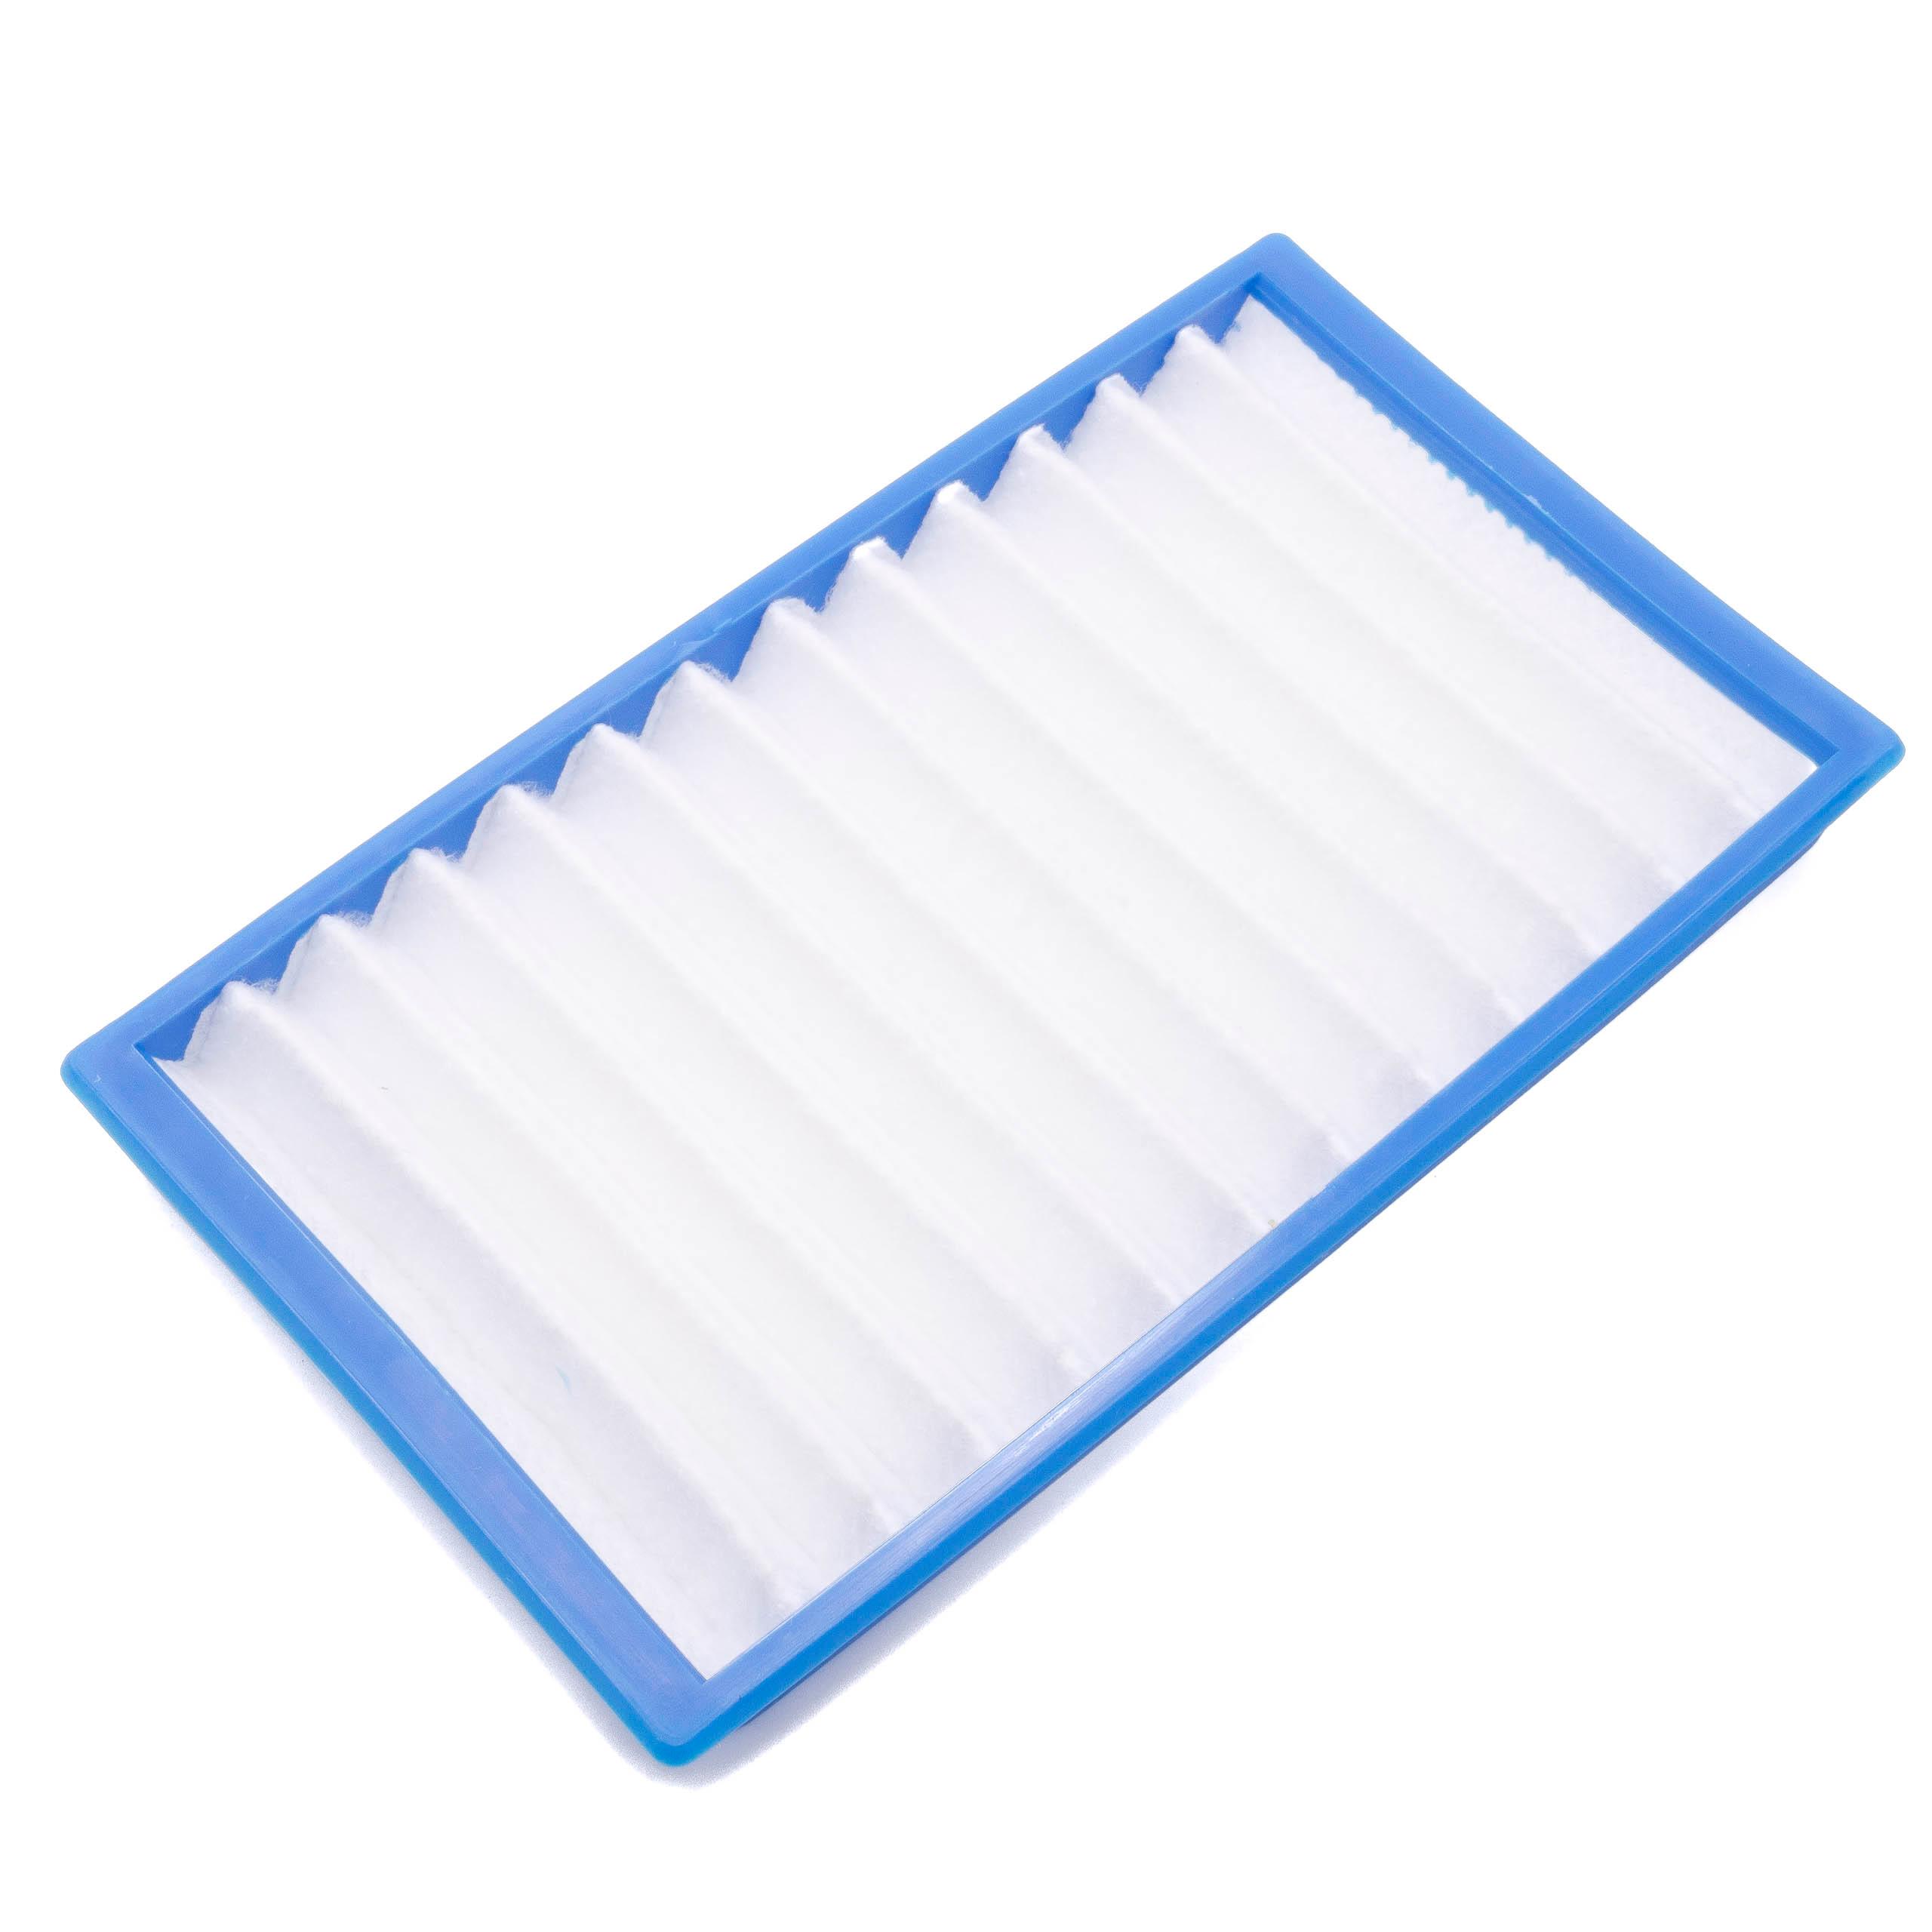 1x HEPA filter replaces Dyson 90767701, 907677-01 for DysonVacuum Cleaner